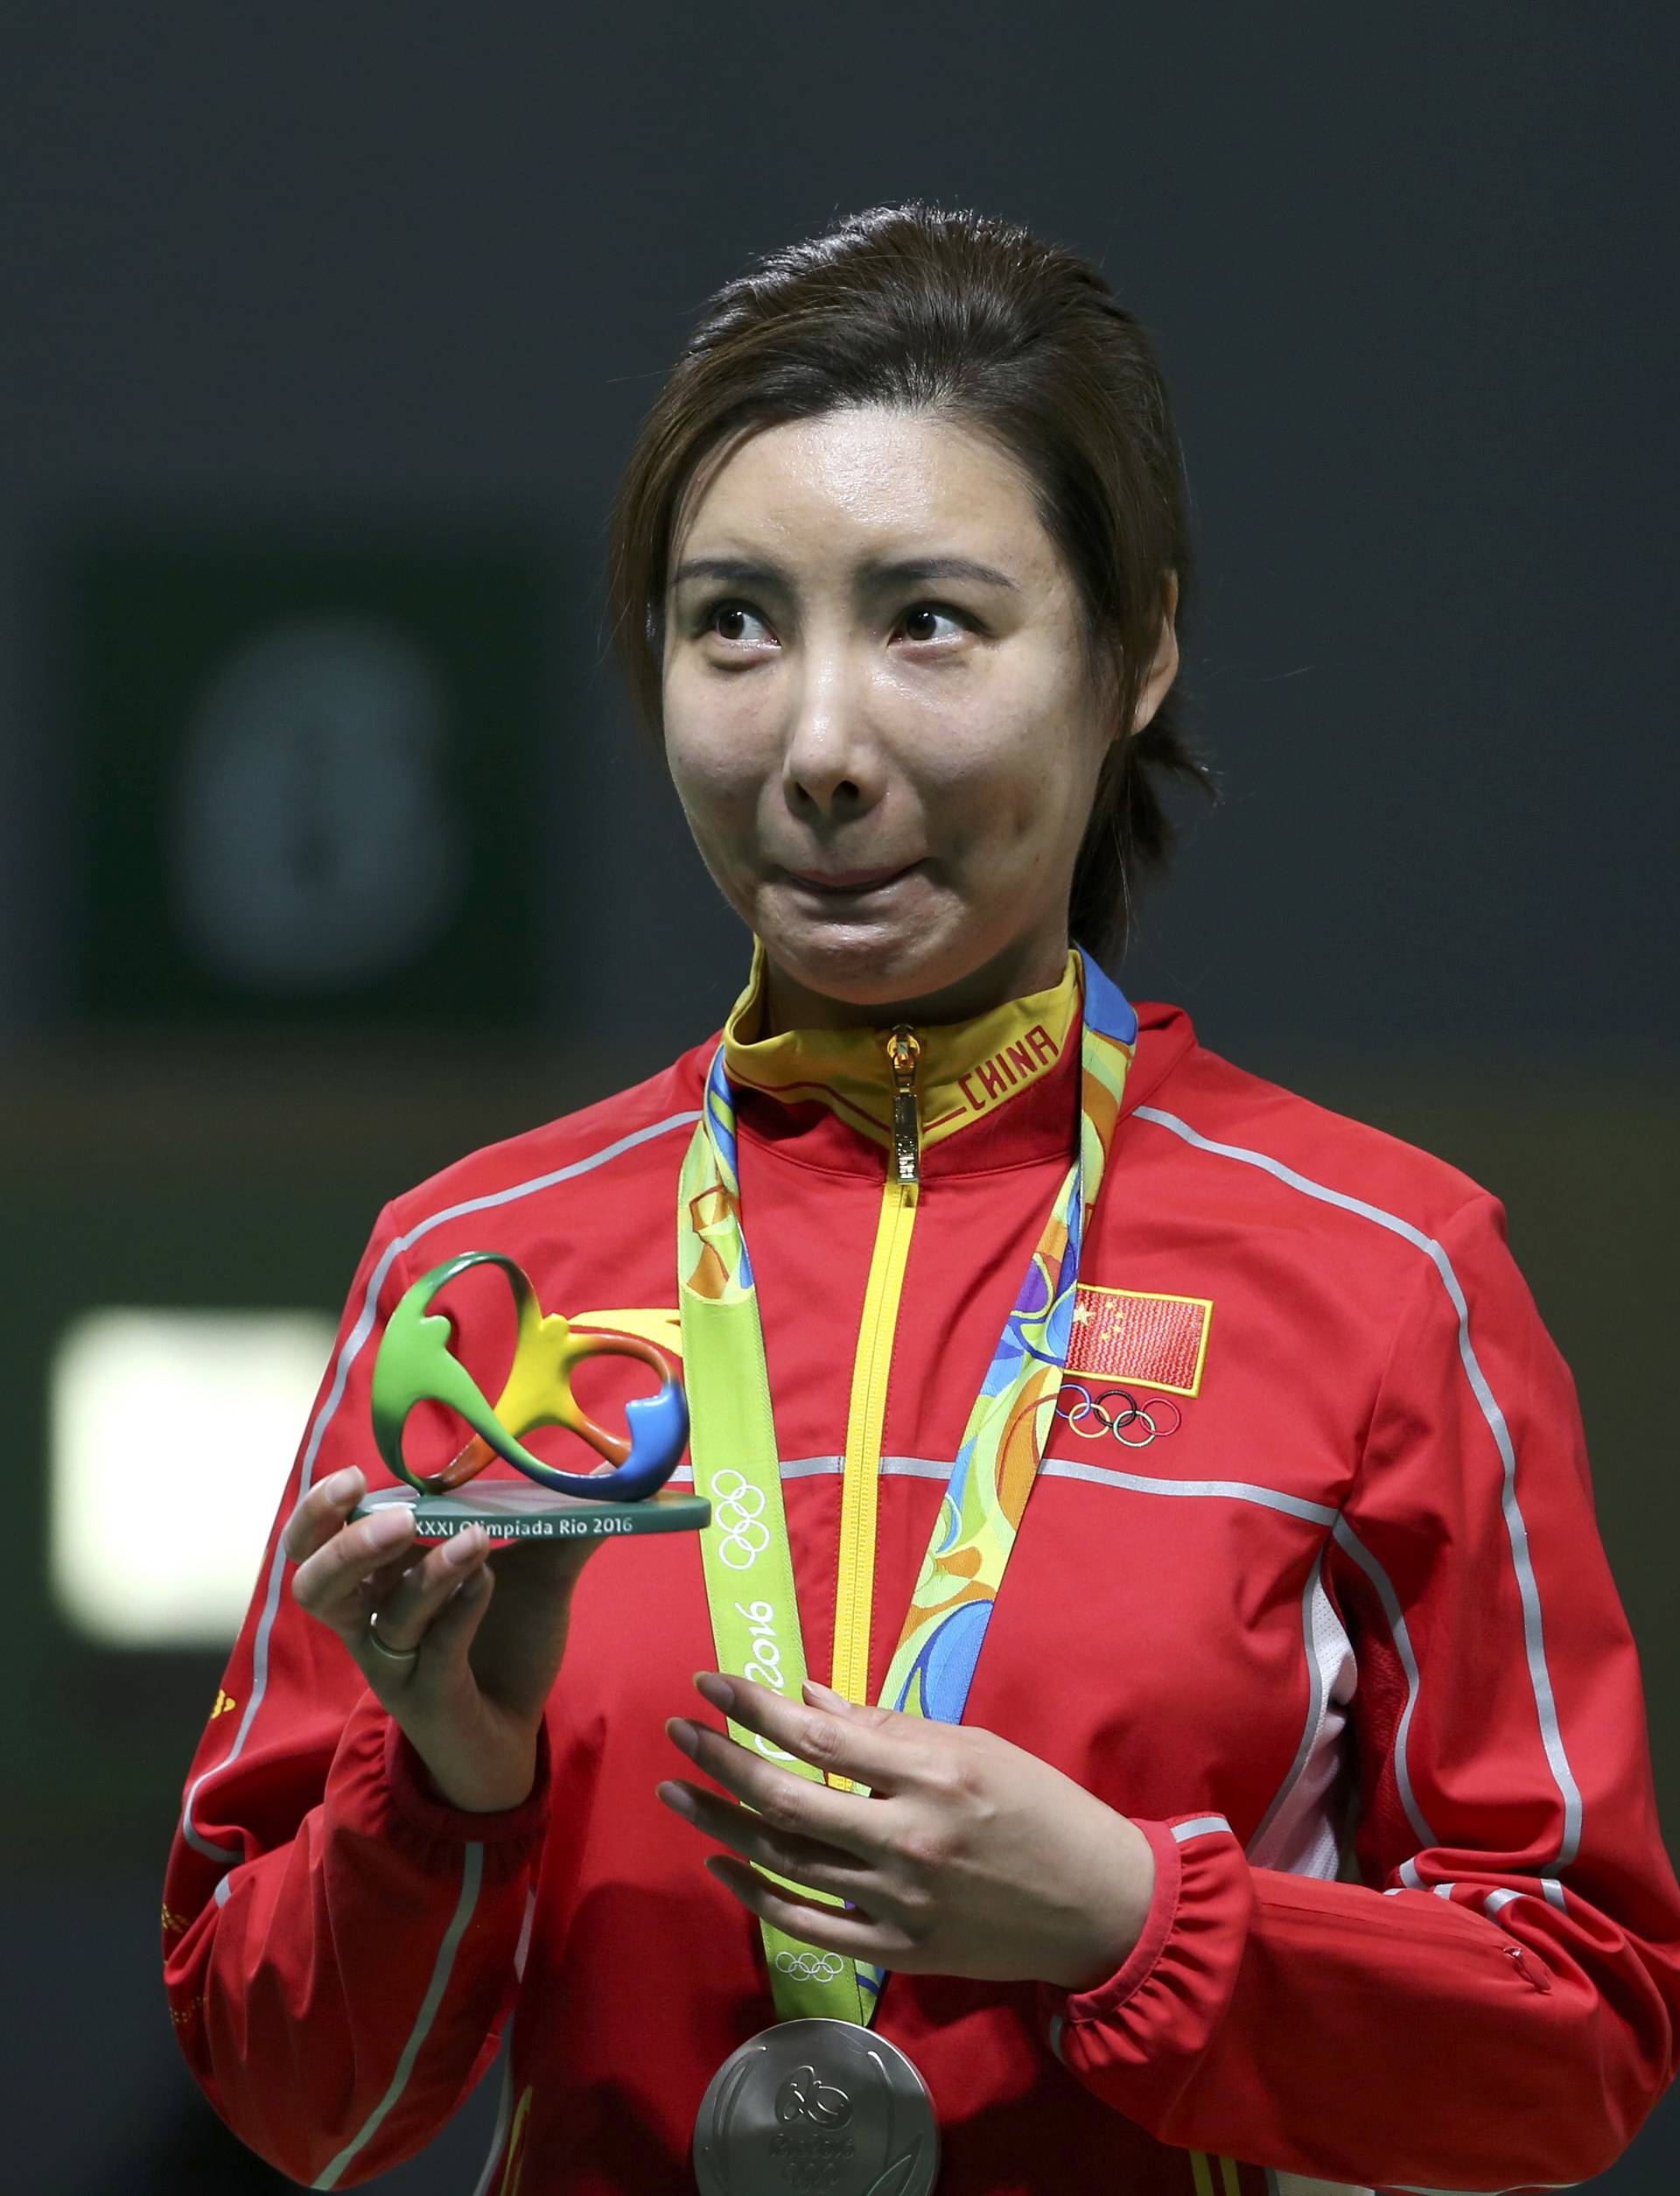 2016 Rio Olympics - Shooting - Victory Ceremony - Women's 10m Air Rifle Victory Ceremony